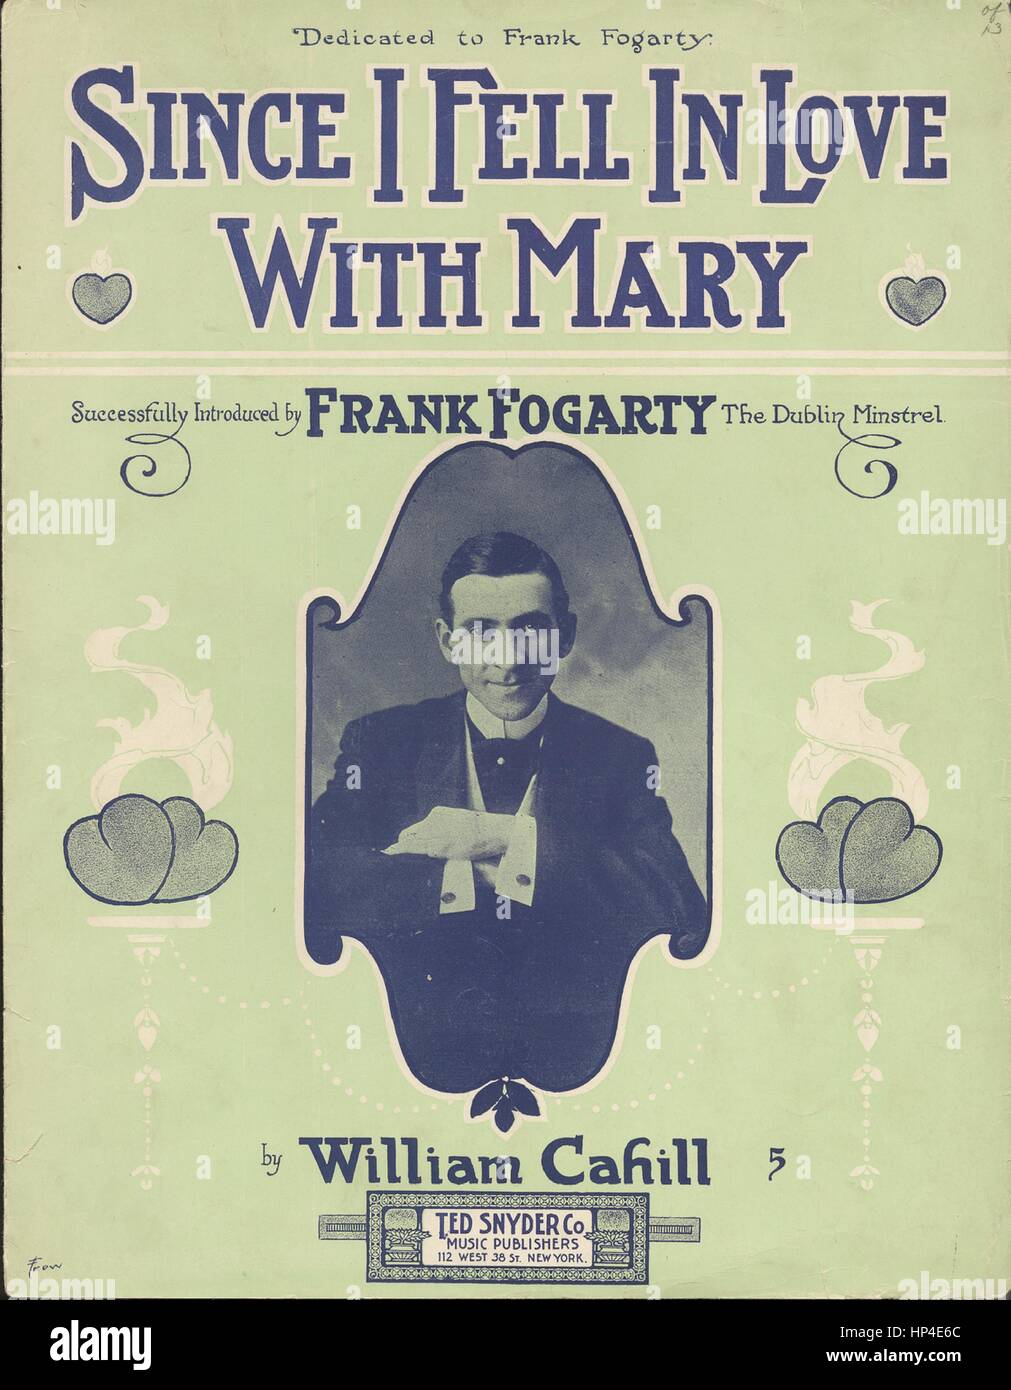 Sheet music cover image of the song 'Since I Fell In Love With Mary', with original authorship notes reading 'by William Cahill', United States, 1910. The publisher is listed as 'Ted Snyder Co., Muisc Publishers, 112 West 38 St.', the form of composition is 'strophic with chorus', the instrumentation is 'piano and voice', the first line reads 'When I left my sweetheart Mary in old Ireland o'er the sea', and the illustration artist is listed as 'Frew; unattrib. photo of Frank Fogarty'. Stock Photo